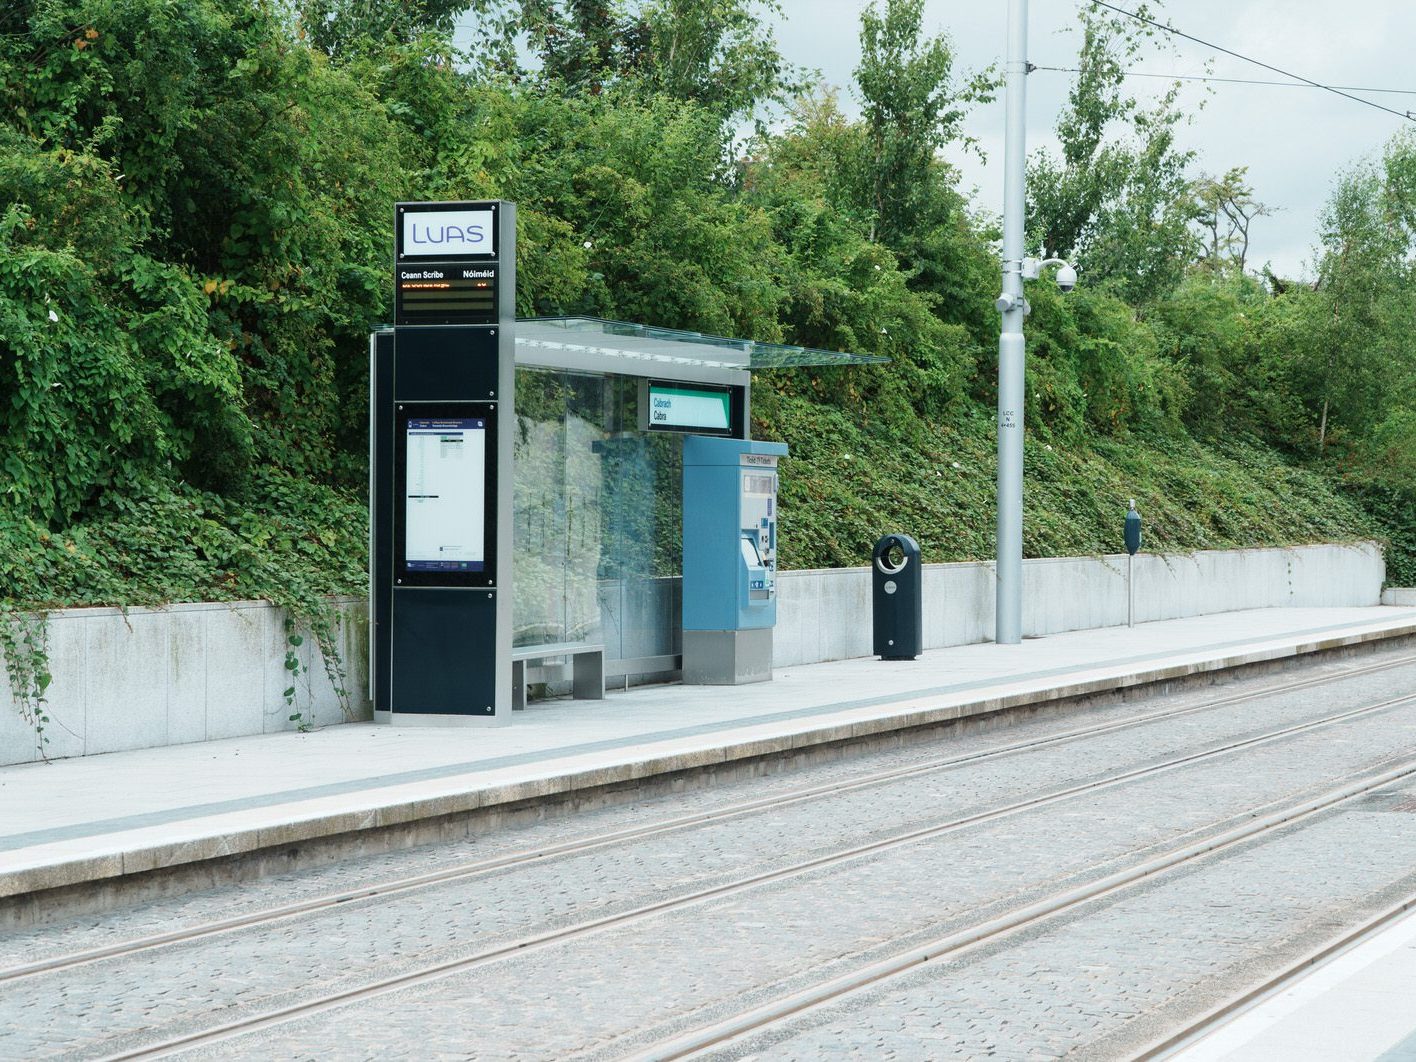 CABRA LUAS TRAM STOP ON CONNAUGHT STREET [GOOGLE BARD INCORRECTLY CLAIMED THAT THERE IS A PUBLIC TOILET AND A TICKET OFFICE] 010